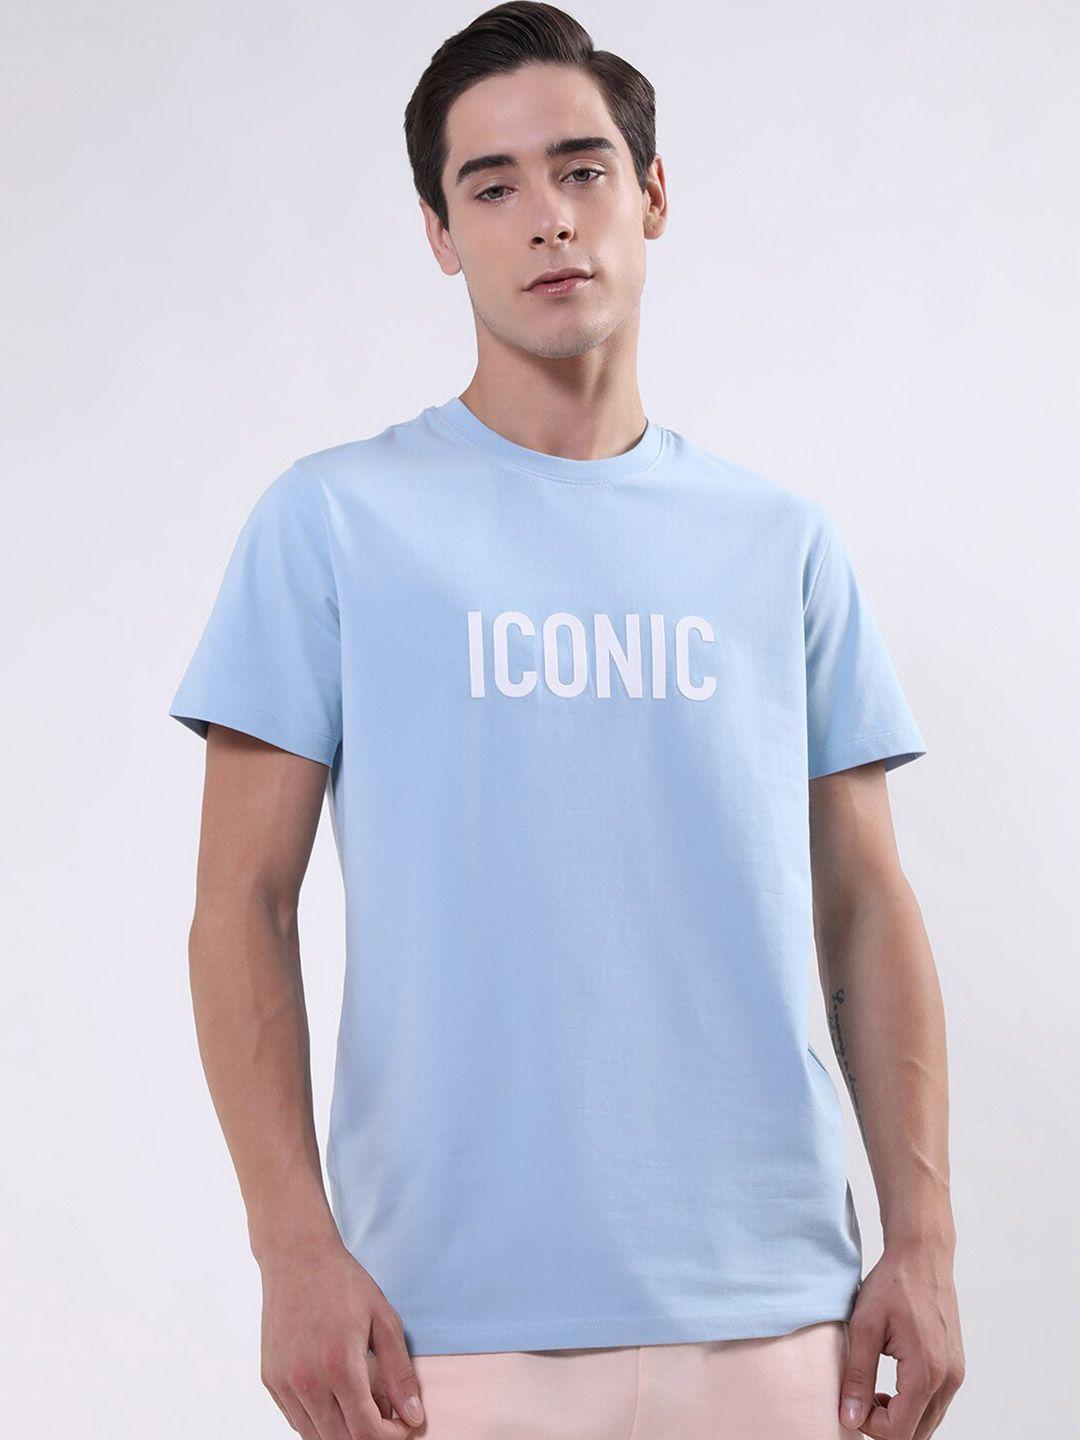 iconic typography printed t-shirt